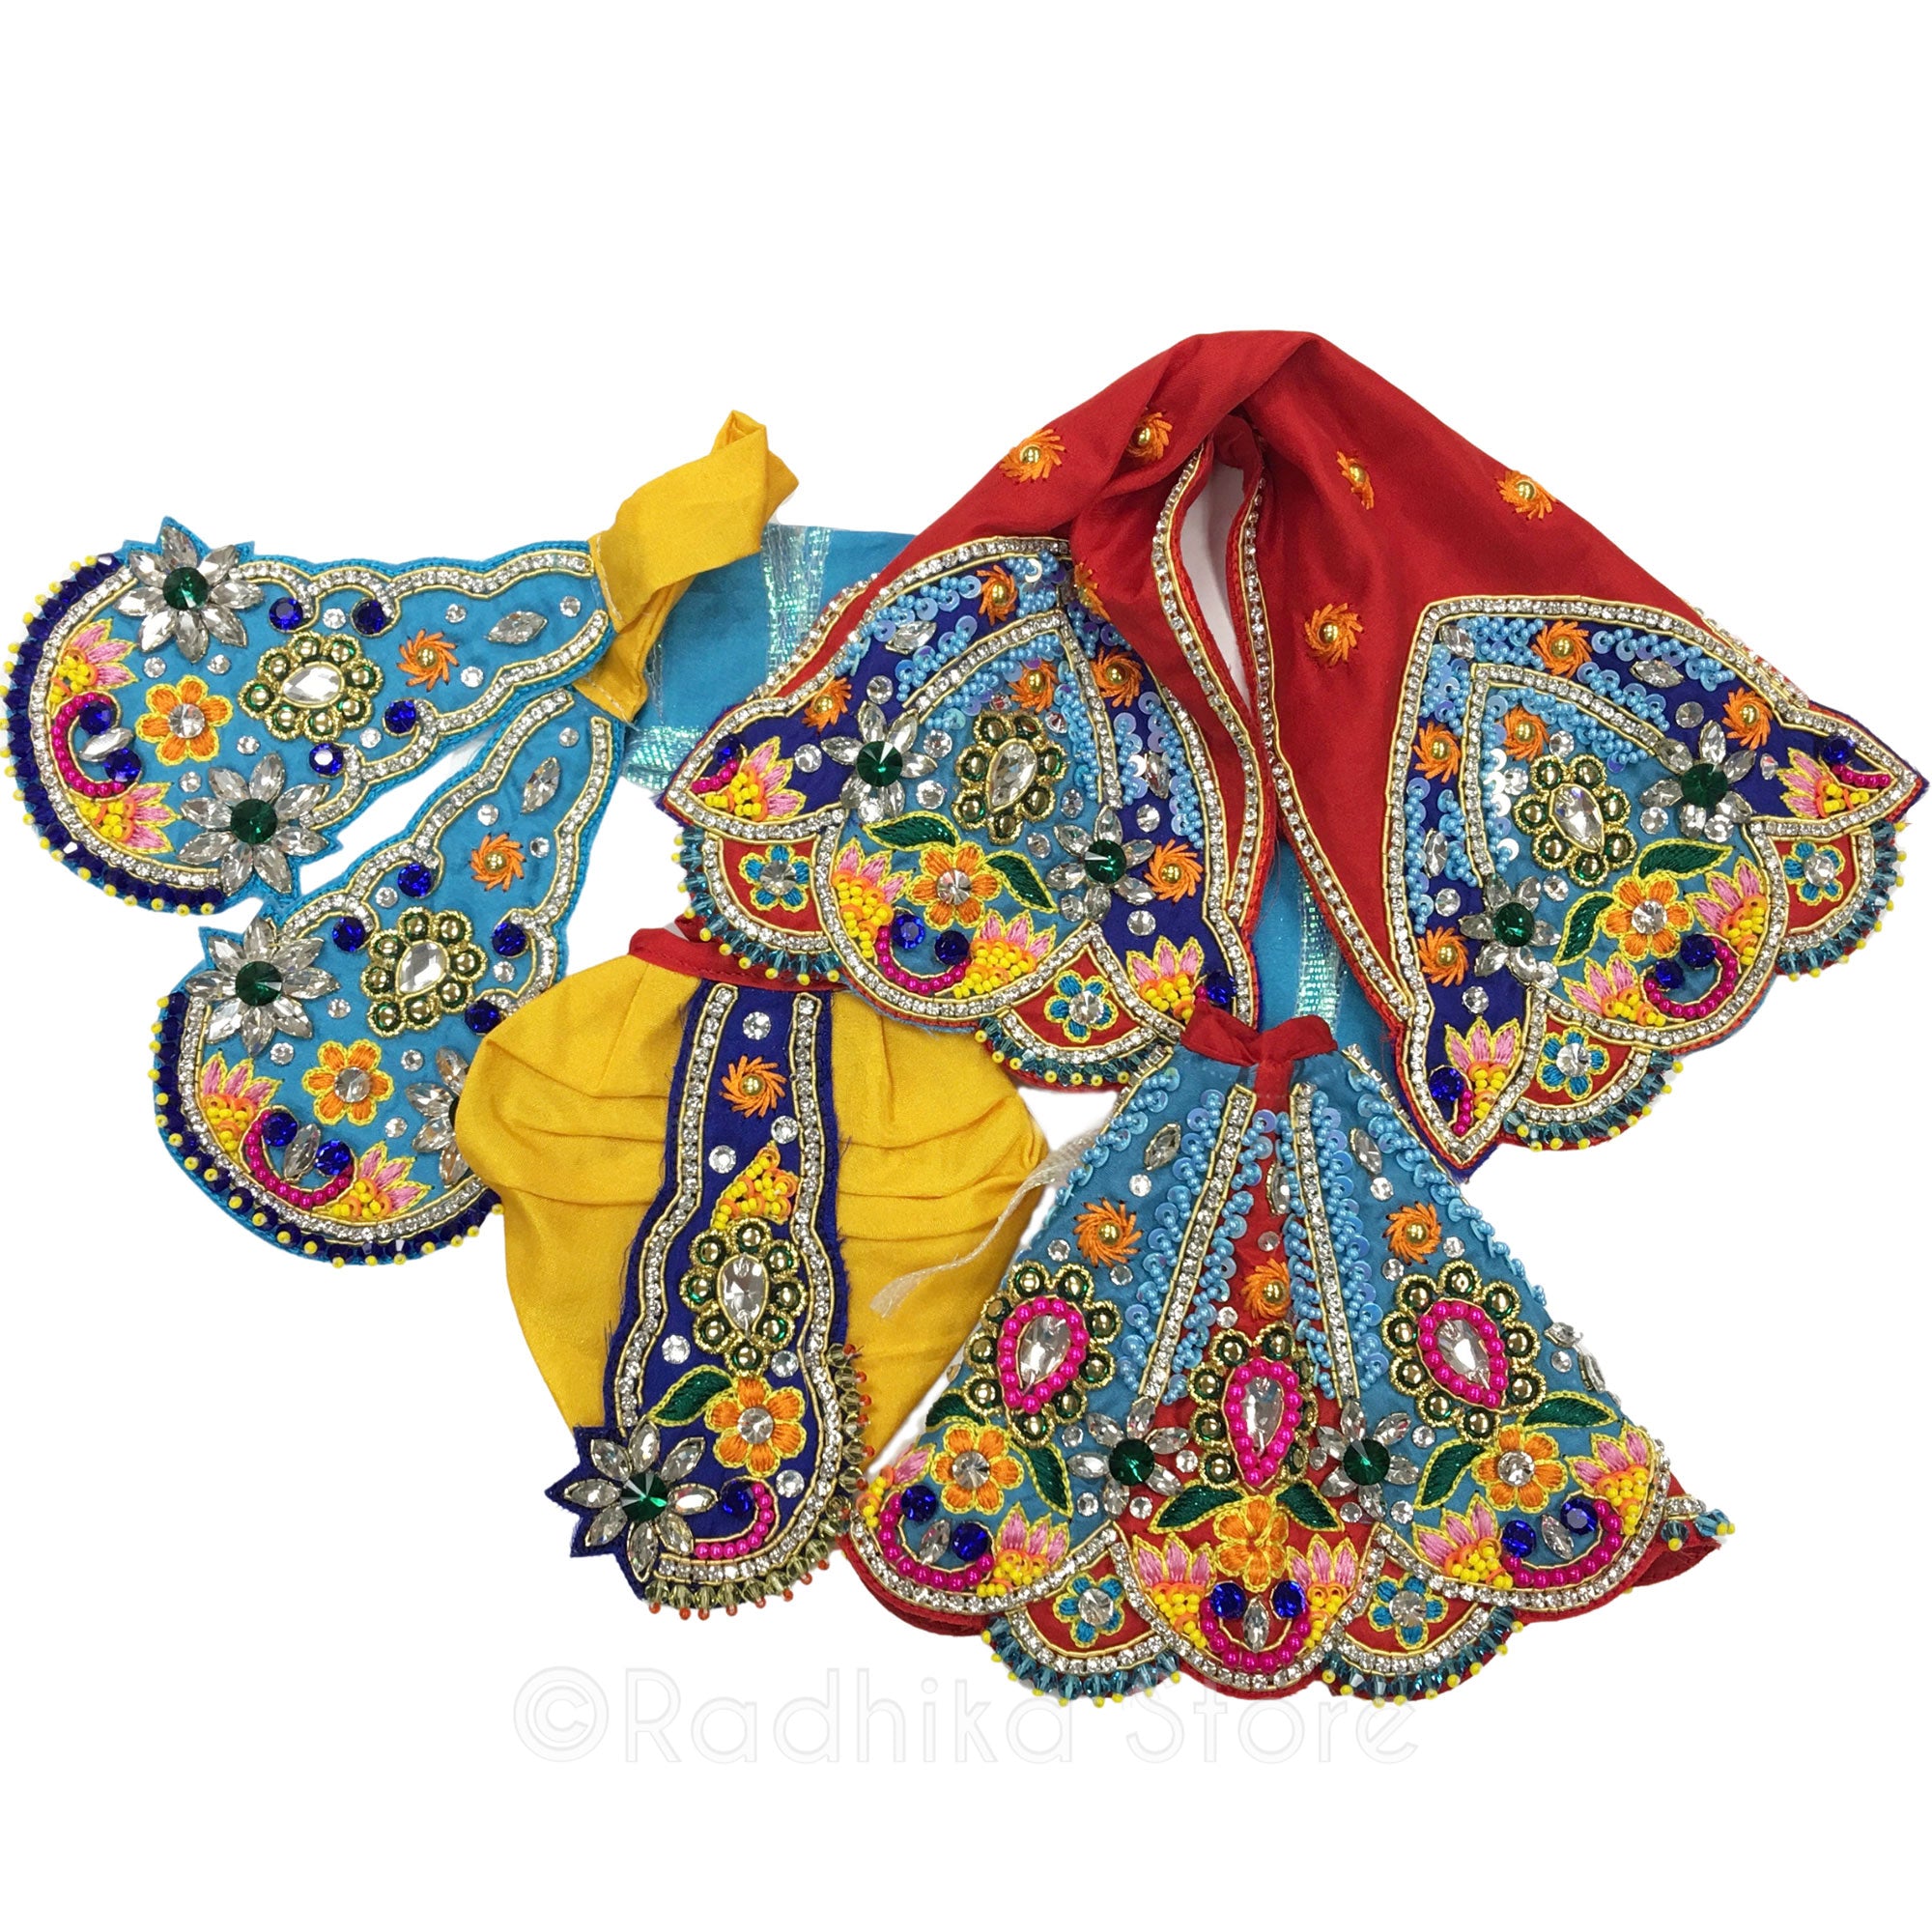 Vrindavan Festival - Yellow and Red Multicolor - Radha Krishna Deity Outfit